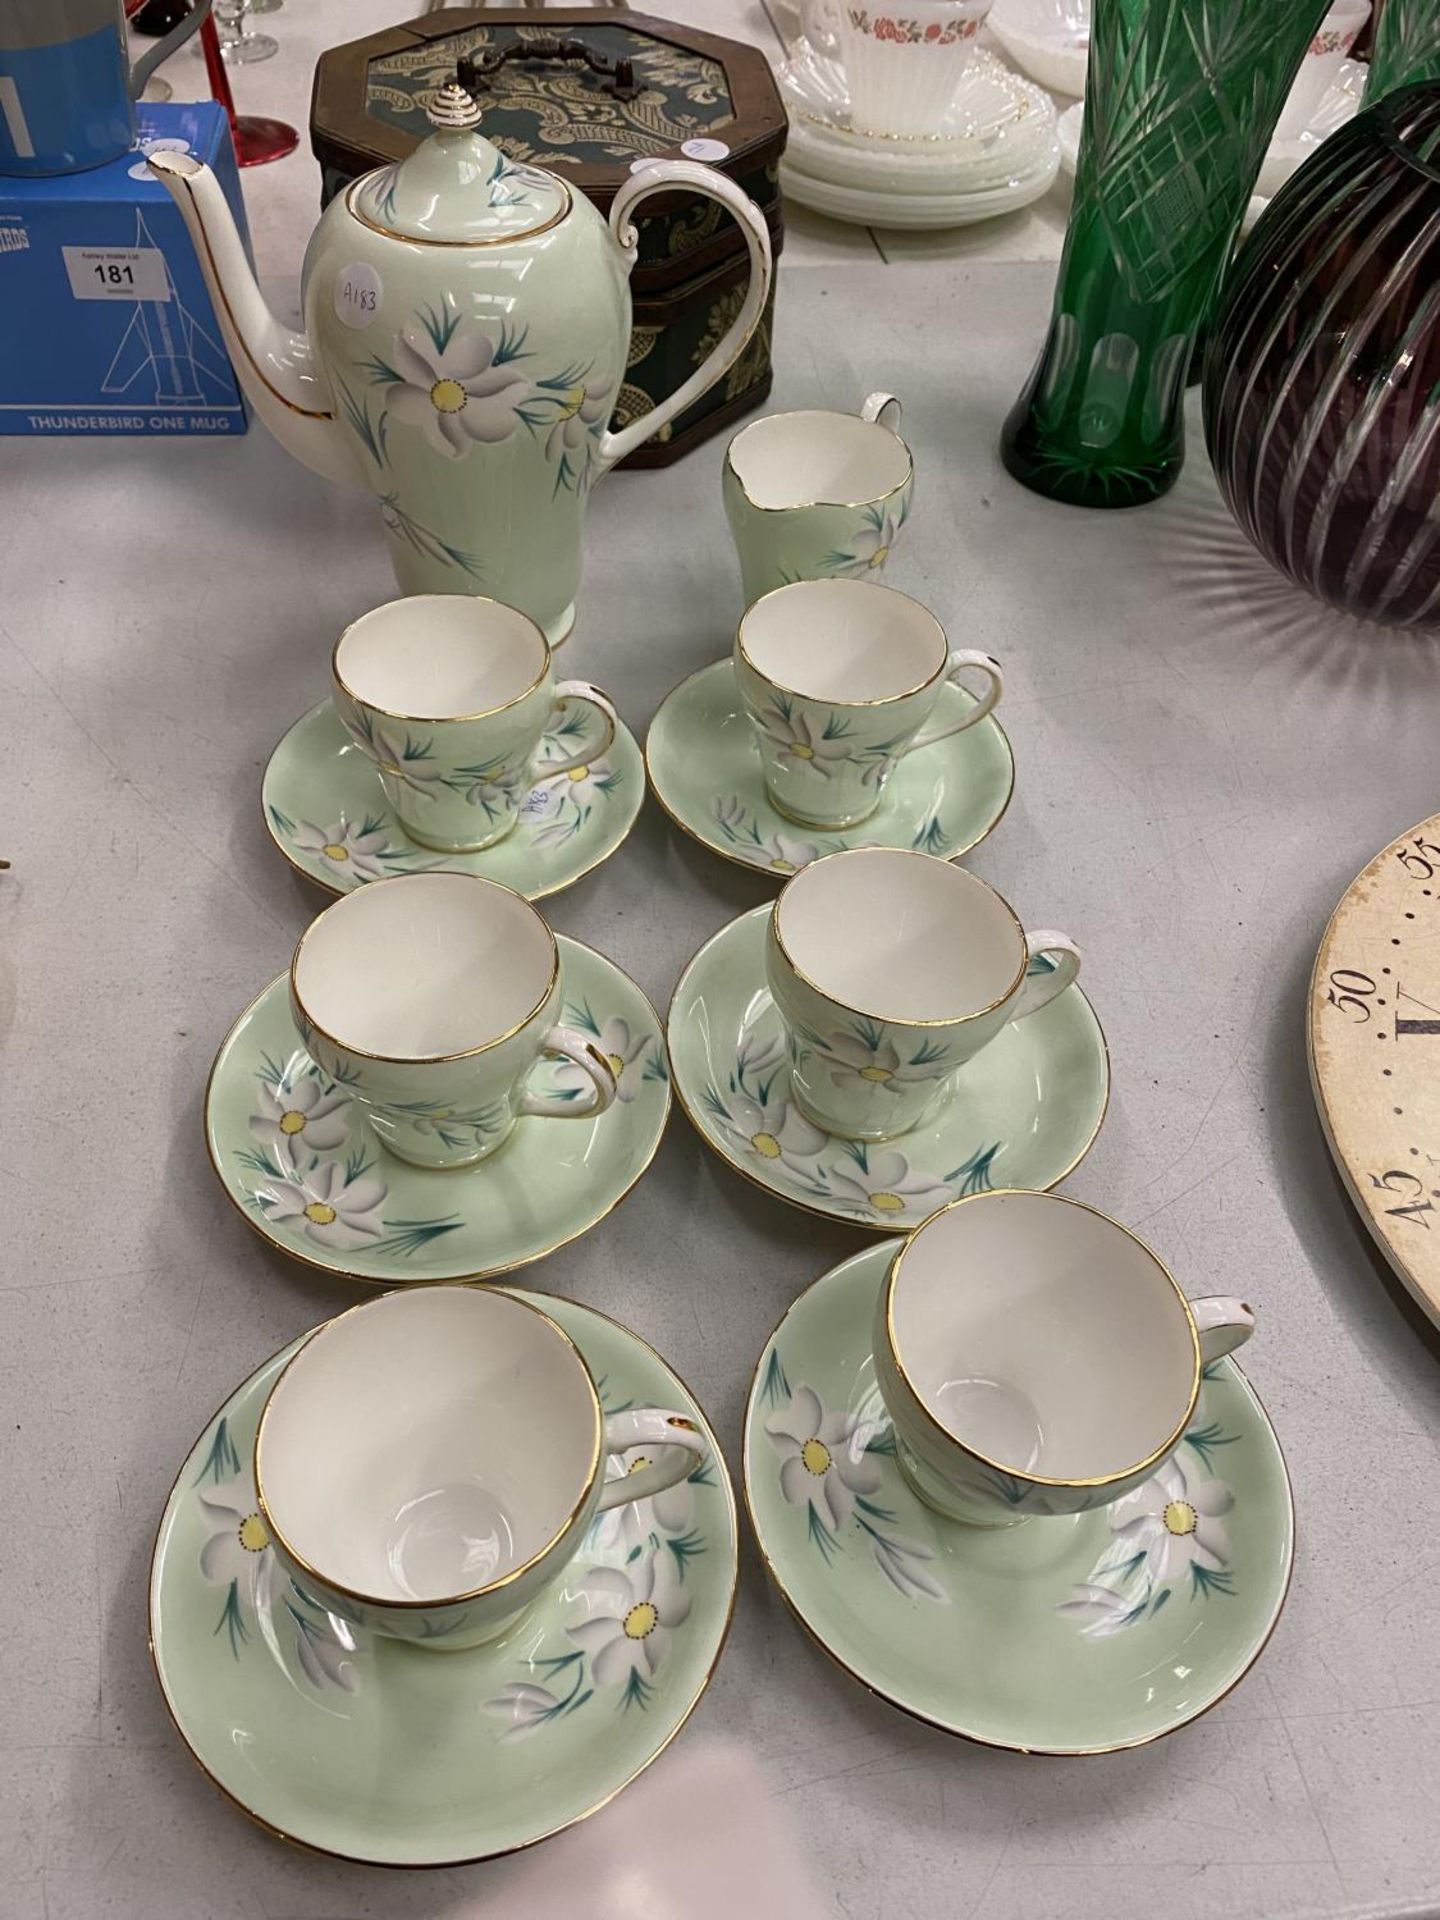 A ROYAL GRAFTON VINTAGE TEASET TO INCLUDE SIX CUPS AND SAUCERS, TEAPOT AND CREAM JUG